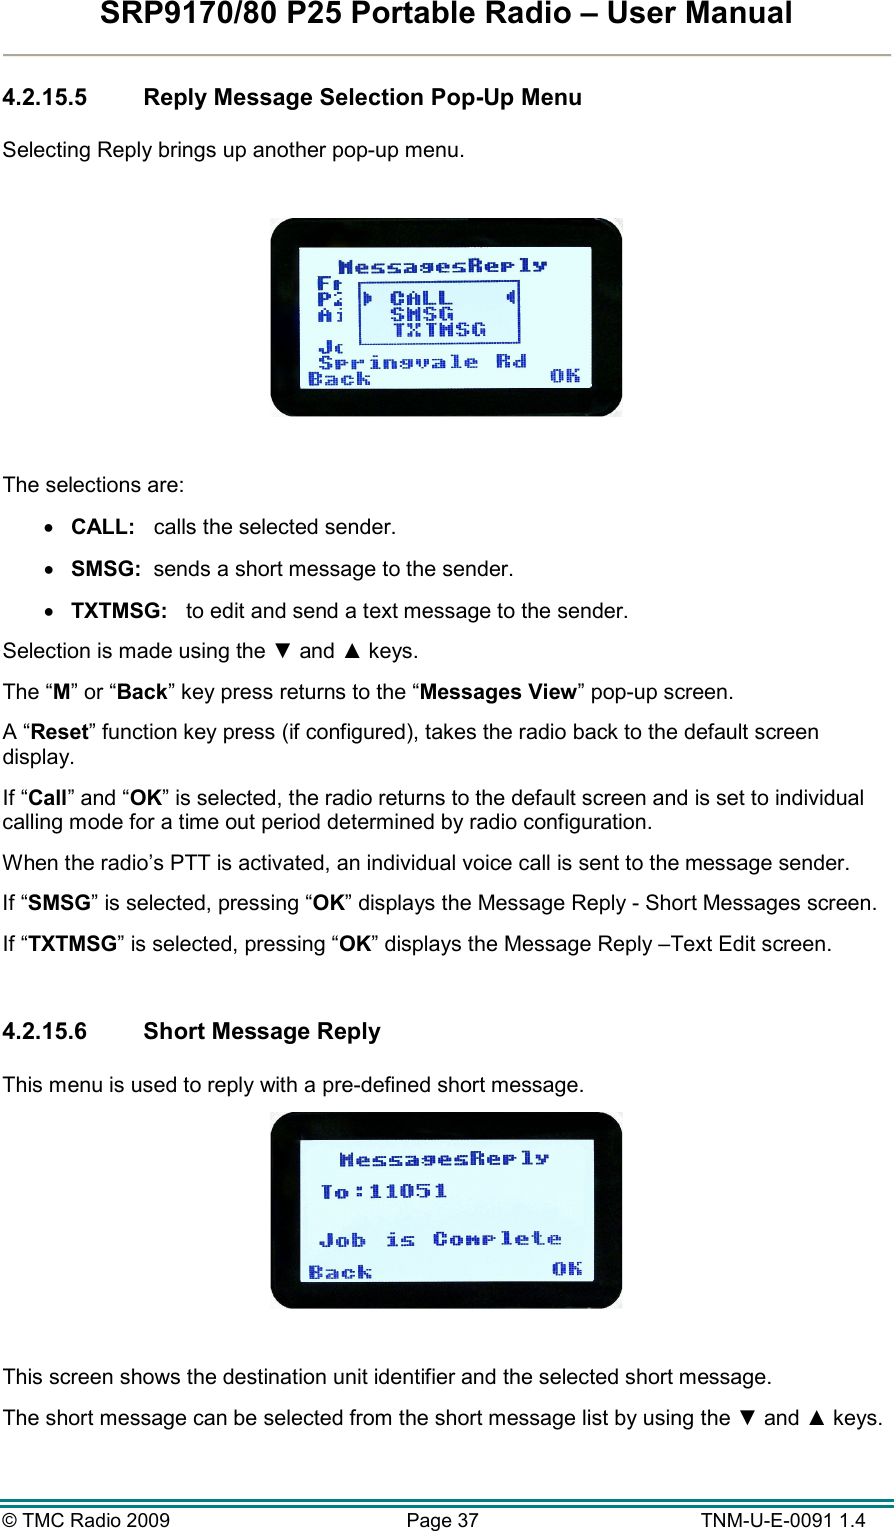 SRP9170/80 P25 Portable Radio – User Manual  © TMC Radio 2009  Page 37   TNM-U-E-0091 1.4 4.2.15.5  Reply Message Selection Pop-Up Menu  Selecting Reply brings up another pop-up menu.    The selections are: •  CALL:   calls the selected sender. •  SMSG:  sends a short message to the sender. •  TXTMSG:   to edit and send a text message to the sender. Selection is made using the ▼ and ▲ keys. The “M” or “Back” key press returns to the “Messages View” pop-up screen. A “Reset” function key press (if configured), takes the radio back to the default screen display. If “Call” and “OK” is selected, the radio returns to the default screen and is set to individual calling mode for a time out period determined by radio configuration. When the radio’s PTT is activated, an individual voice call is sent to the message sender. If “SMSG” is selected, pressing “OK” displays the Message Reply - Short Messages screen. If “TXTMSG” is selected, pressing “OK” displays the Message Reply –Text Edit screen.  4.2.15.6  Short Message Reply  This menu is used to reply with a pre-defined short message.   This screen shows the destination unit identifier and the selected short message. The short message can be selected from the short message list by using the ▼ and ▲ keys. 